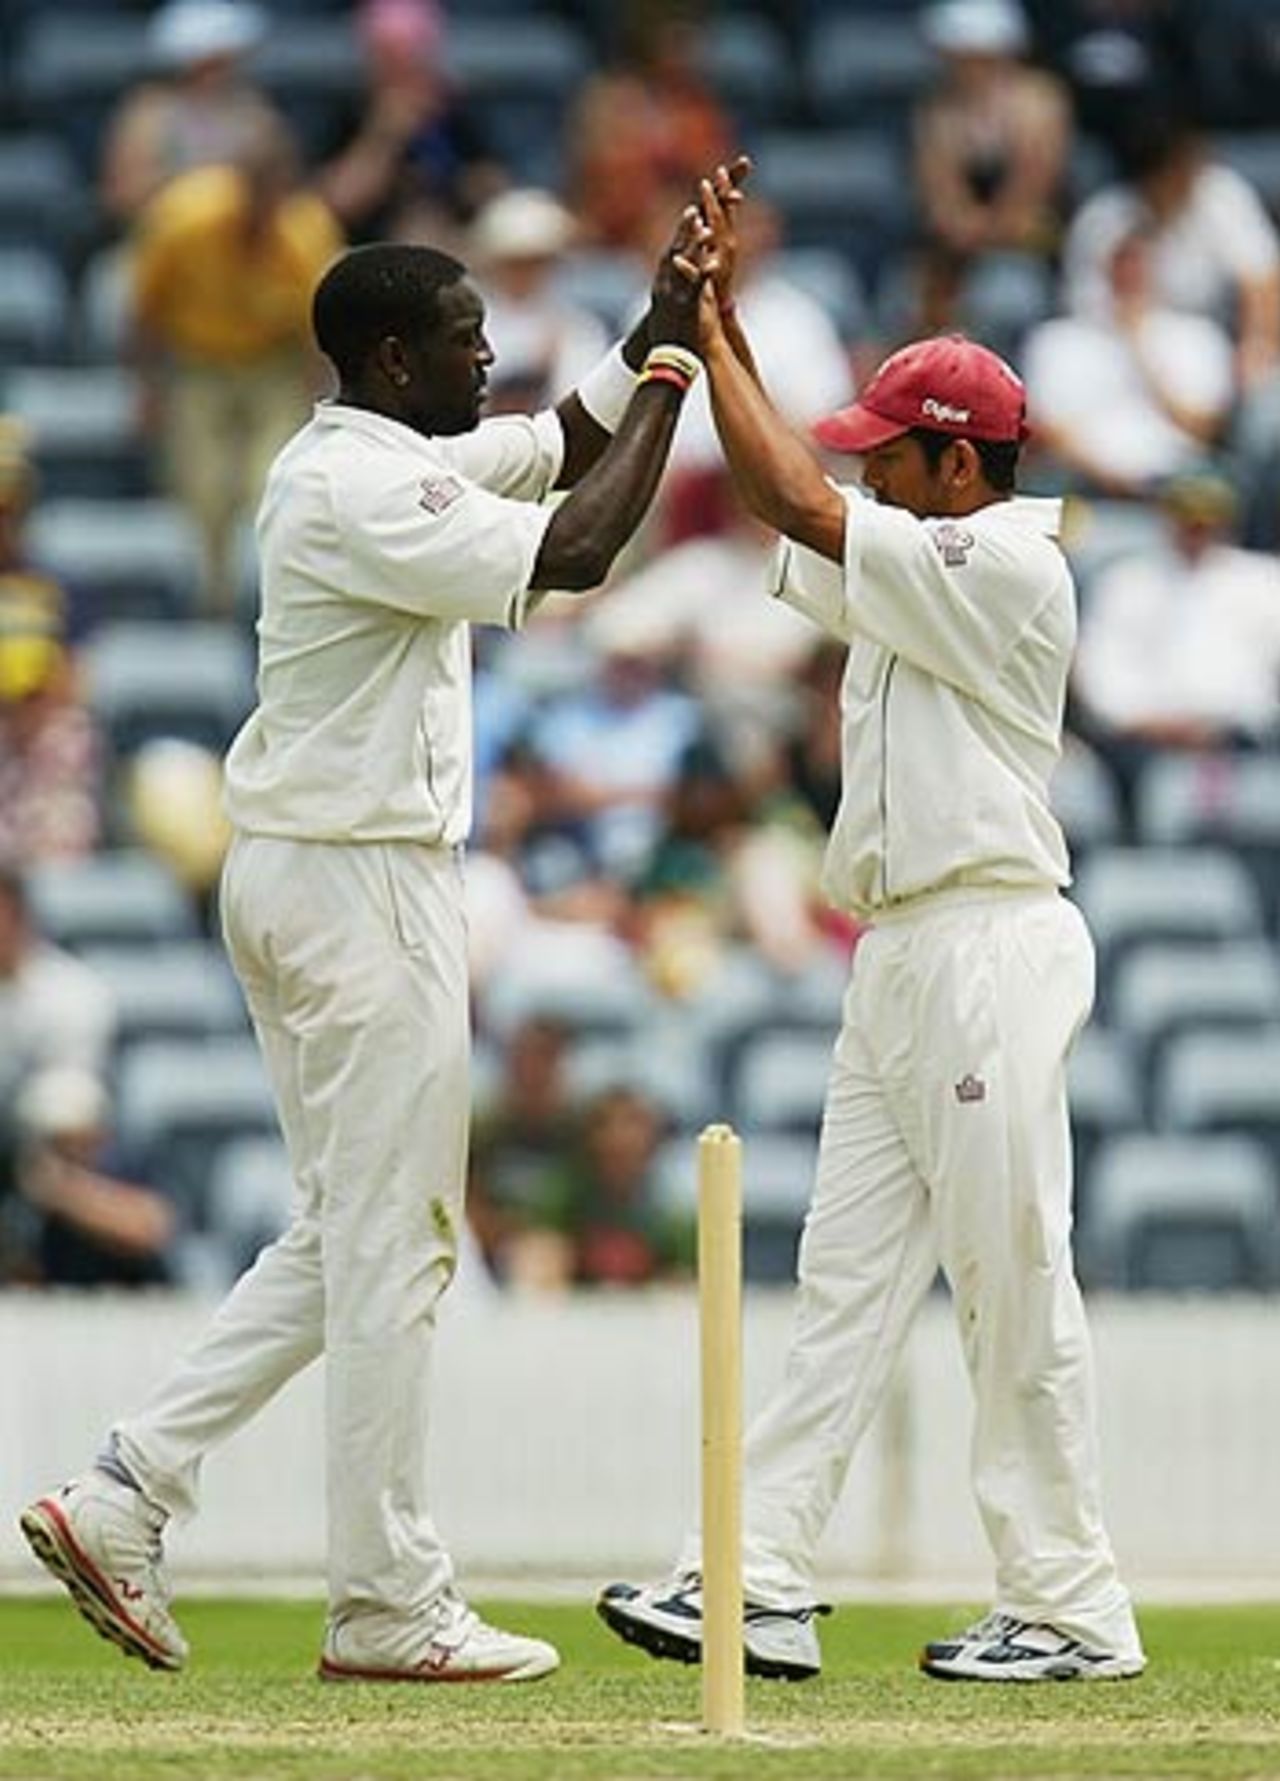 Jermaine Lawson celebrates the wicket of David Dawson, Prime Minister's XI v West Indians, Canberra, December 2, 2005